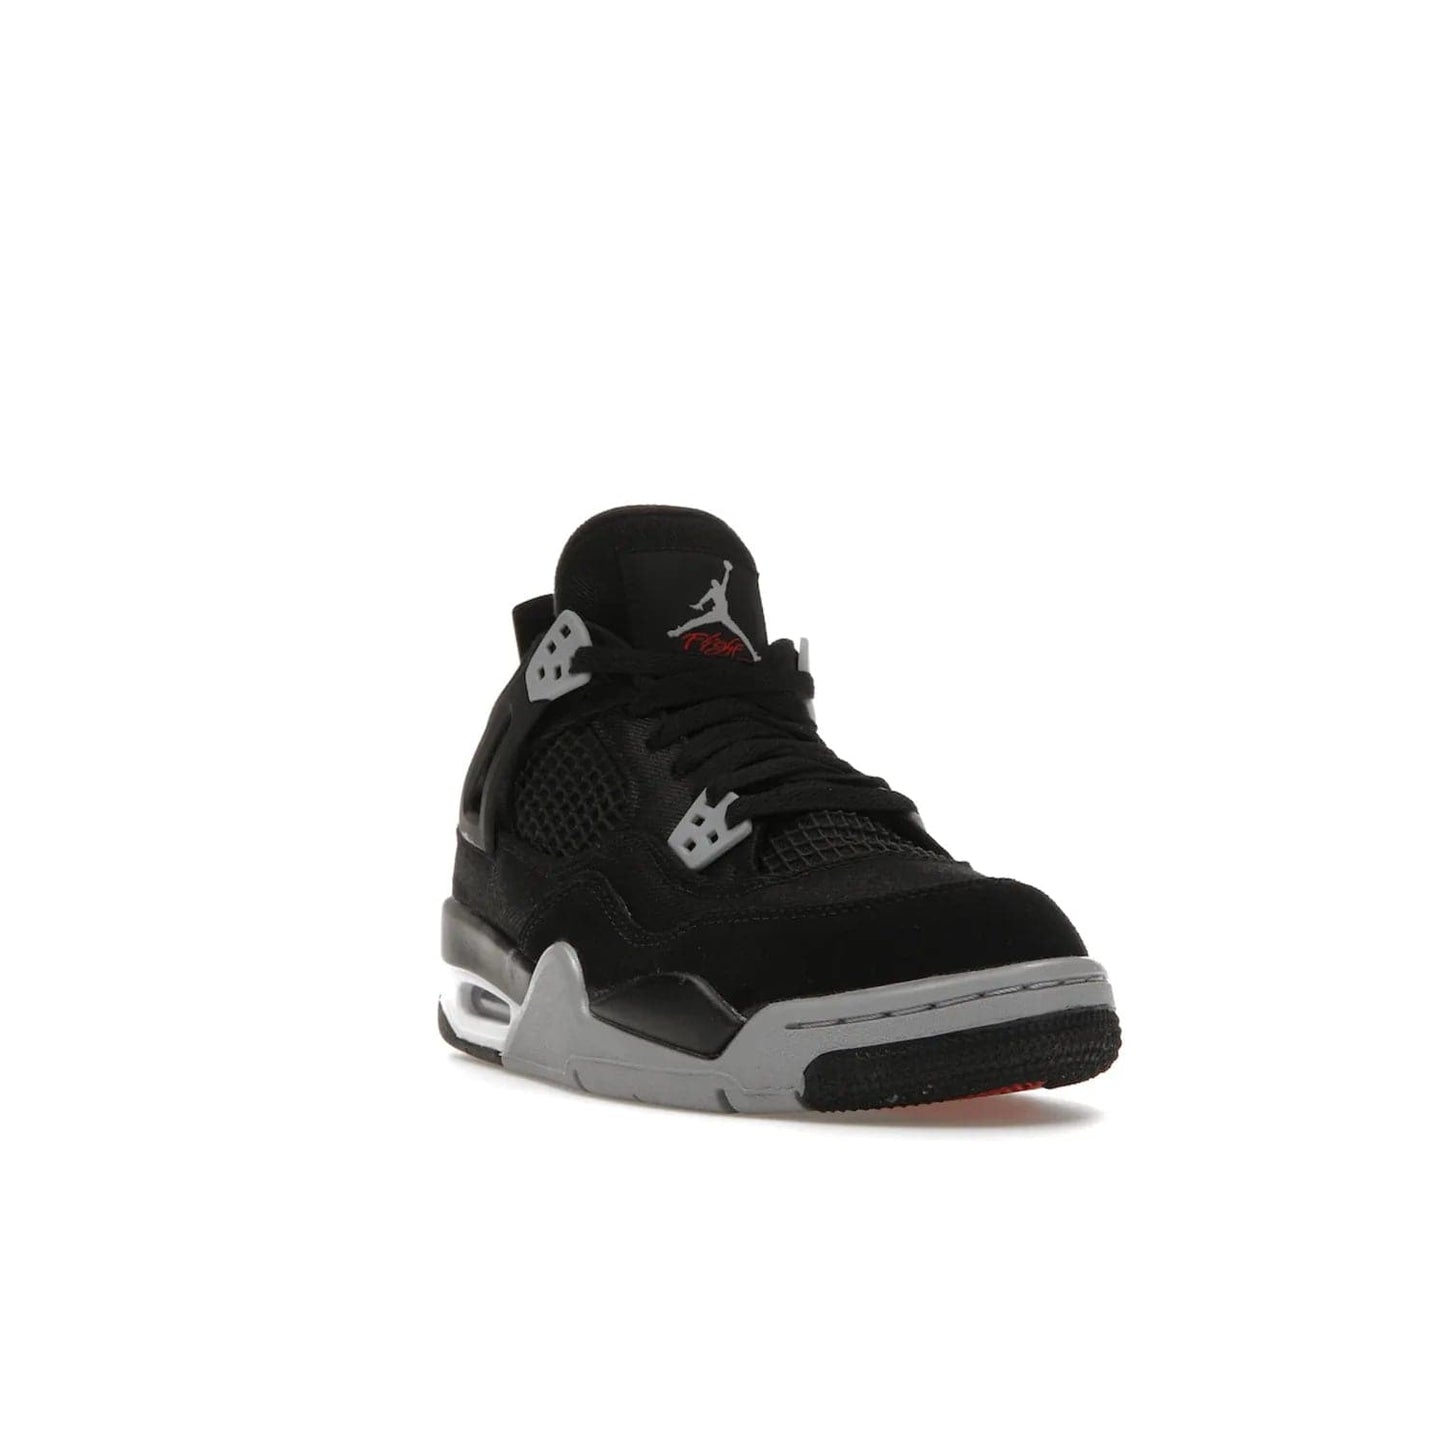 Jordan 4 Retro Black Canvas (GS) - Image 7 - Only at www.BallersClubKickz.com - Premium Air Jordan 4 Retro Black Canvas in grade-schooler's catalog. Featuring black suede canvas upper, grey molding, accents in red, white midsole, woven Jumpman tag, & visible AIR cushioning. Releasing Oct. 1, 2022.